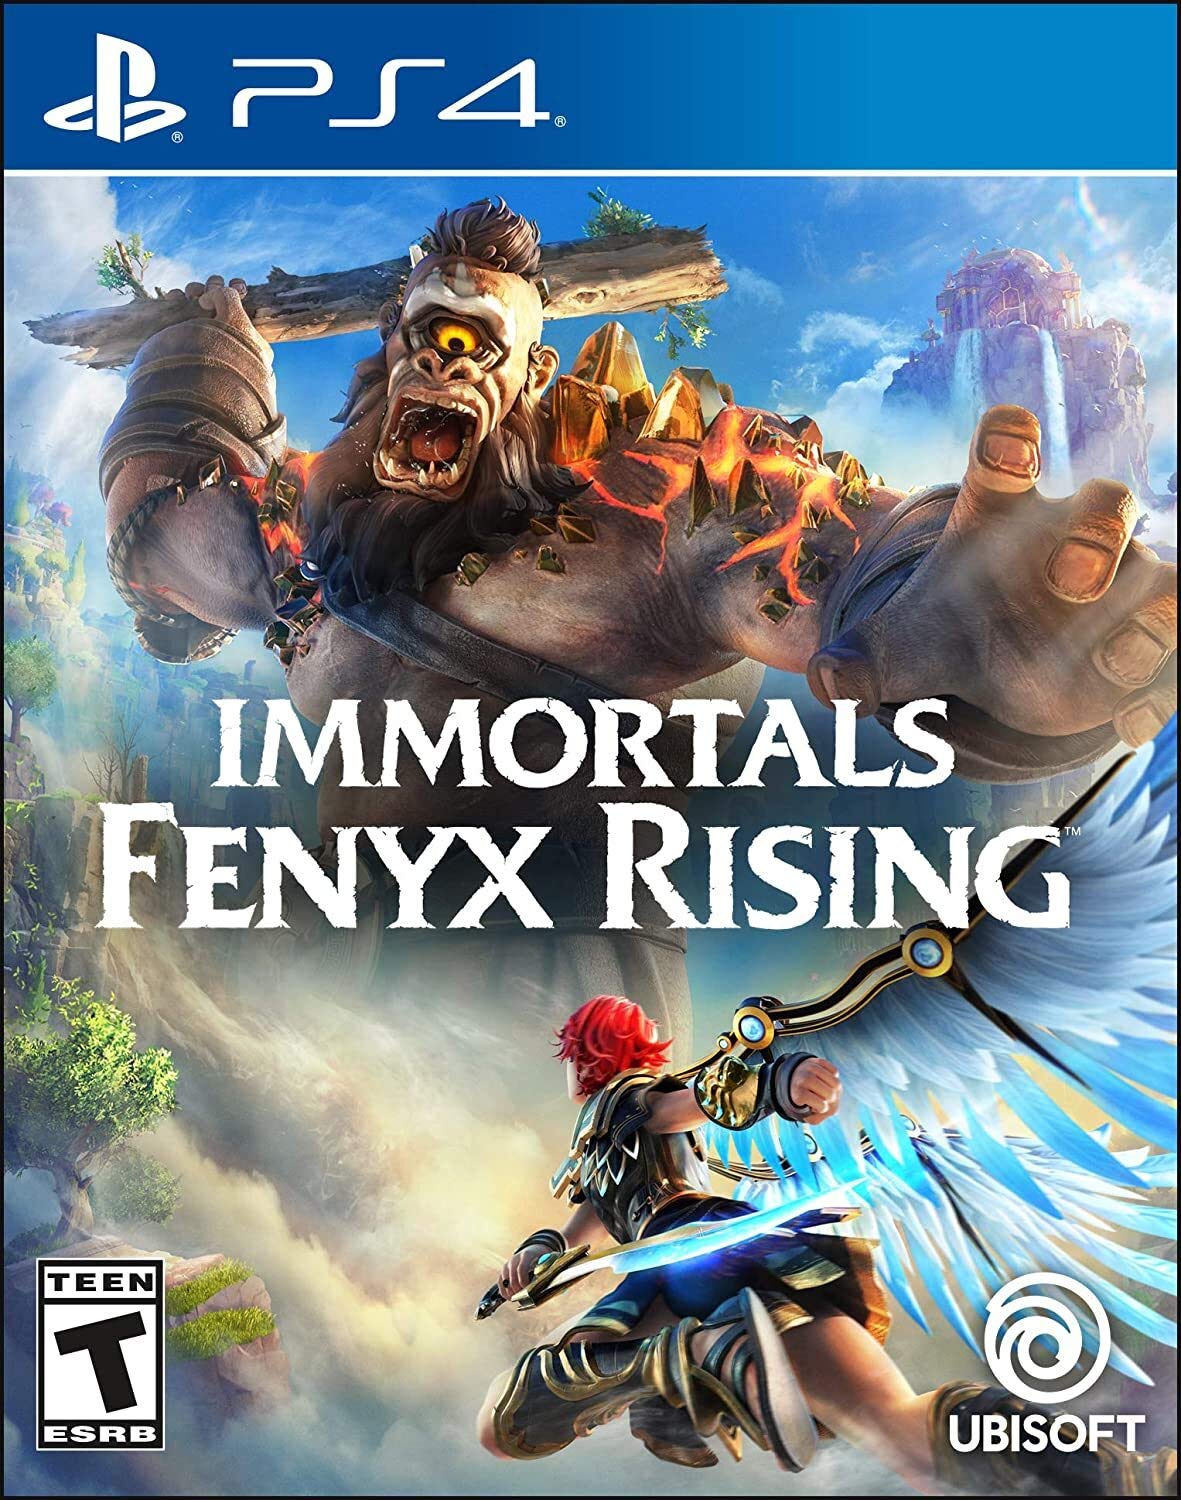 Immortals Fenyx Rising (PlayStation 4, Physical) $9.47 + Free Shipping w/ Prime or on $25+